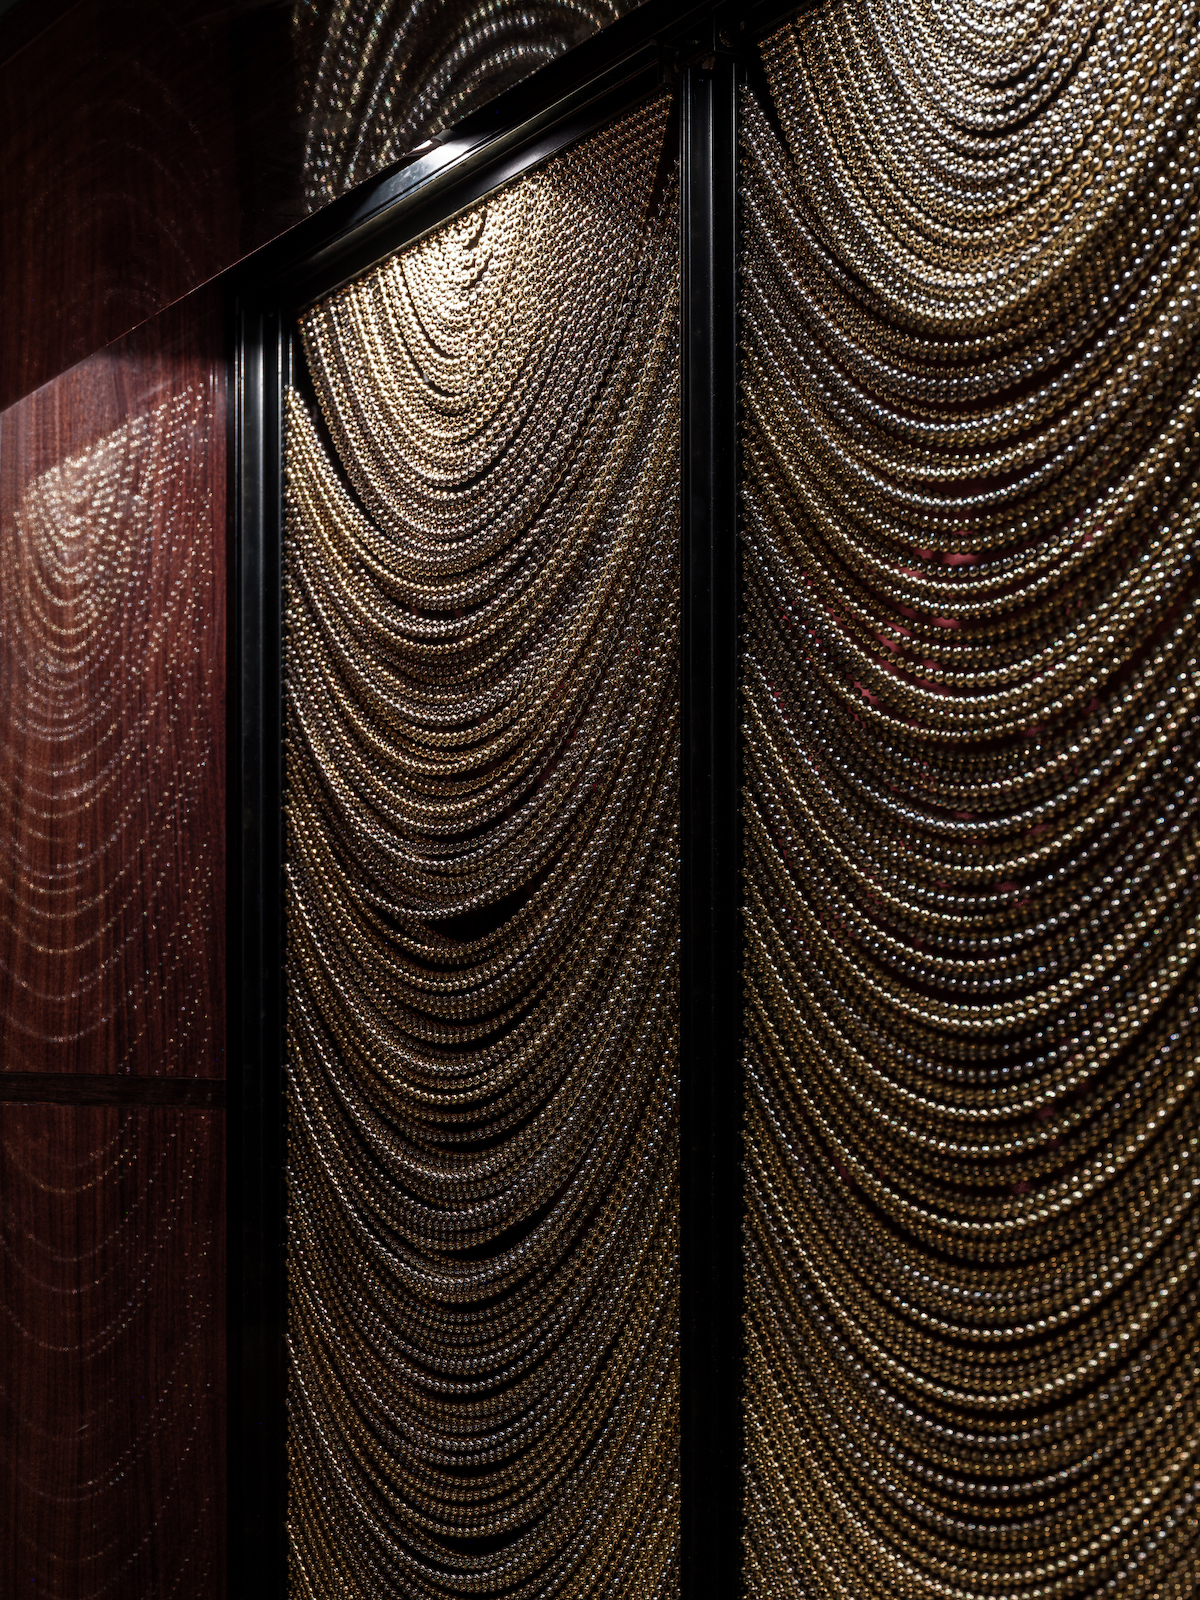 Close up of metal drapes in cocktail bar